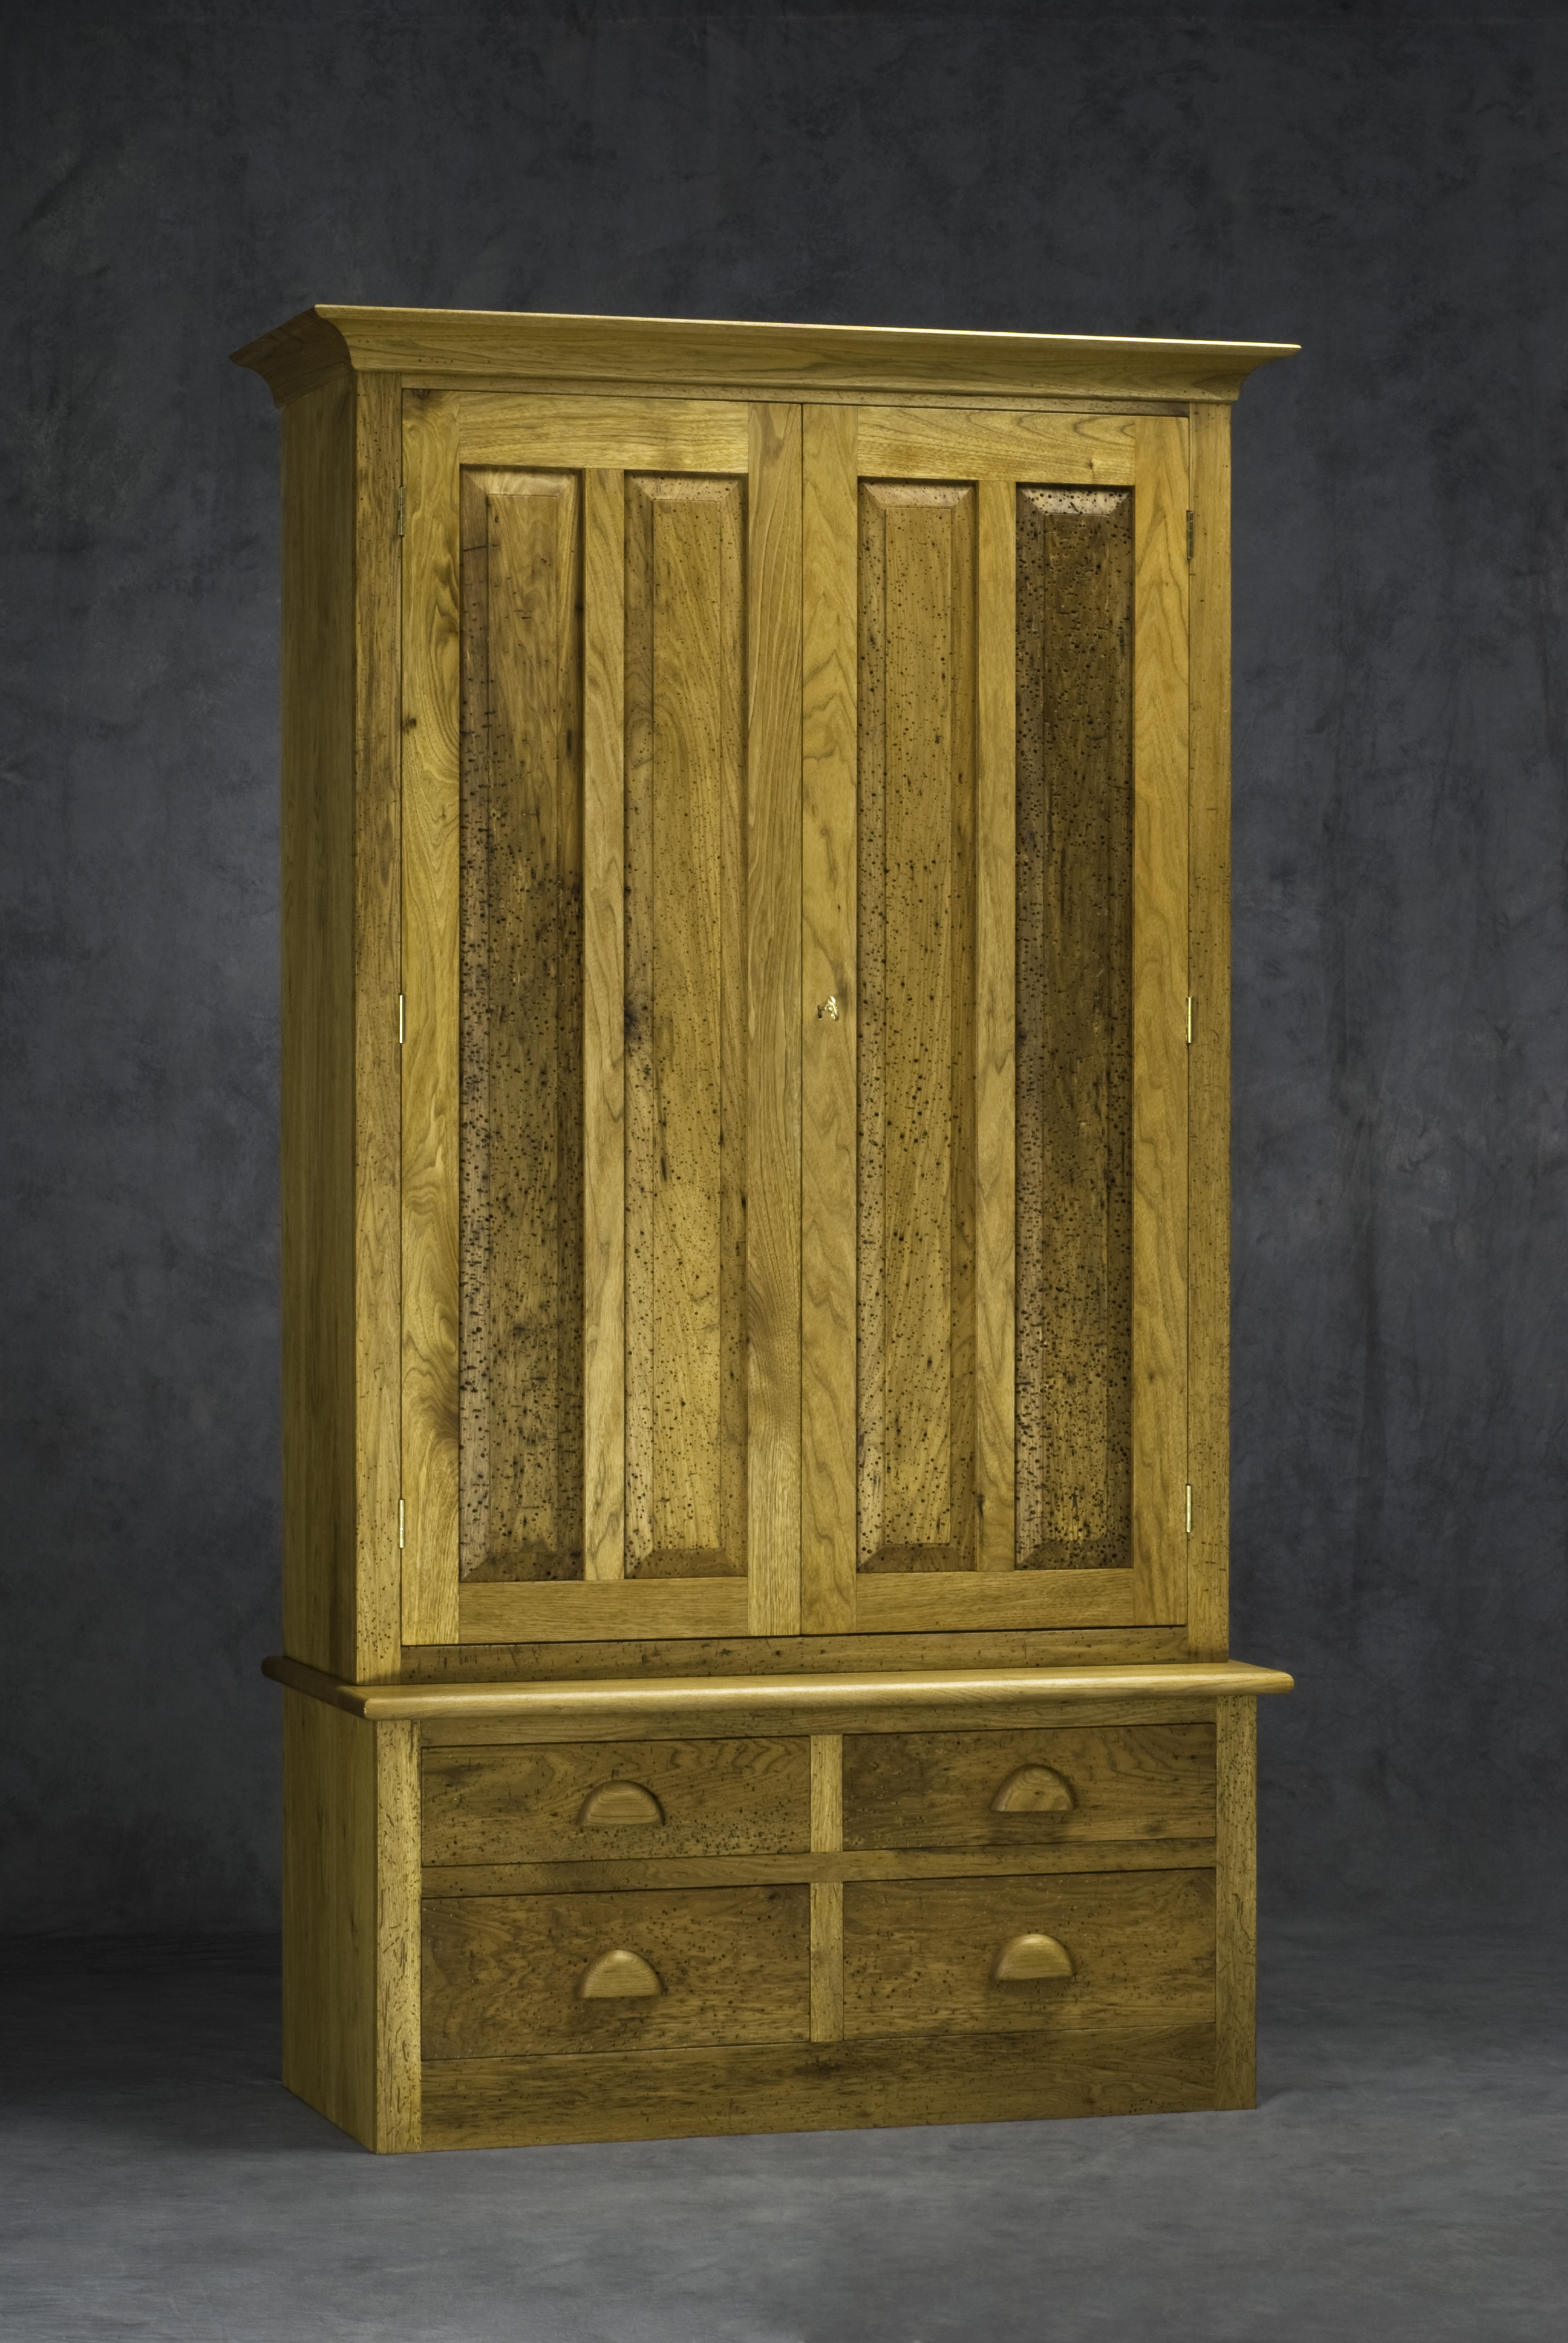 Handcrafted Furniture - Furniture Handcrafted - Gun Cabinets - Hand made in Vermont